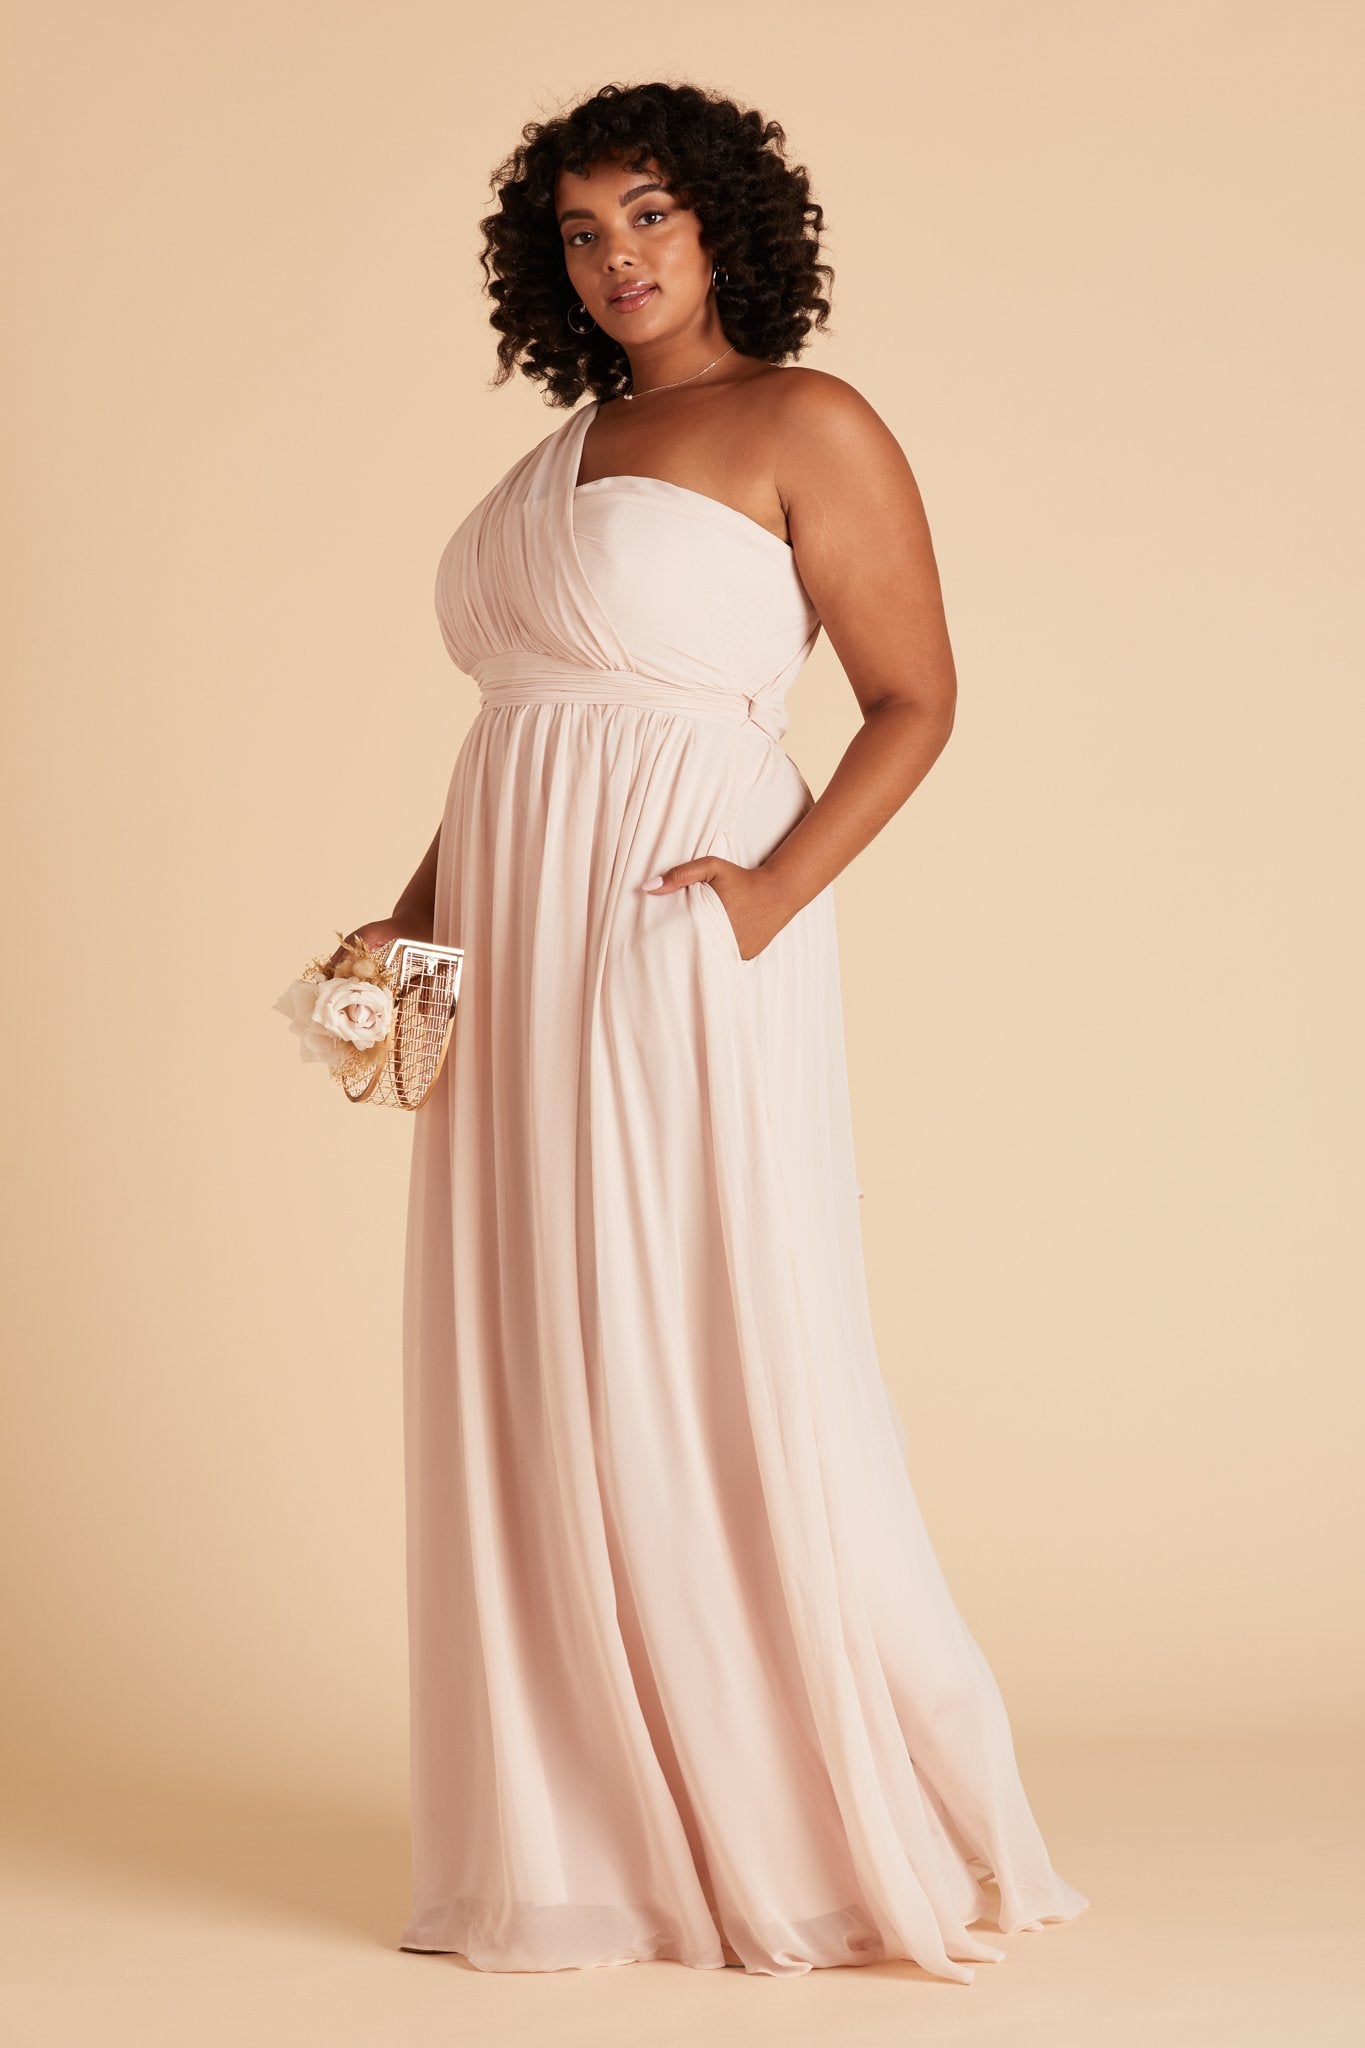 Grace convertible plus size bridesmaid dress in pale blush pink chiffon by Birdy Grey, front view with hand in pocket